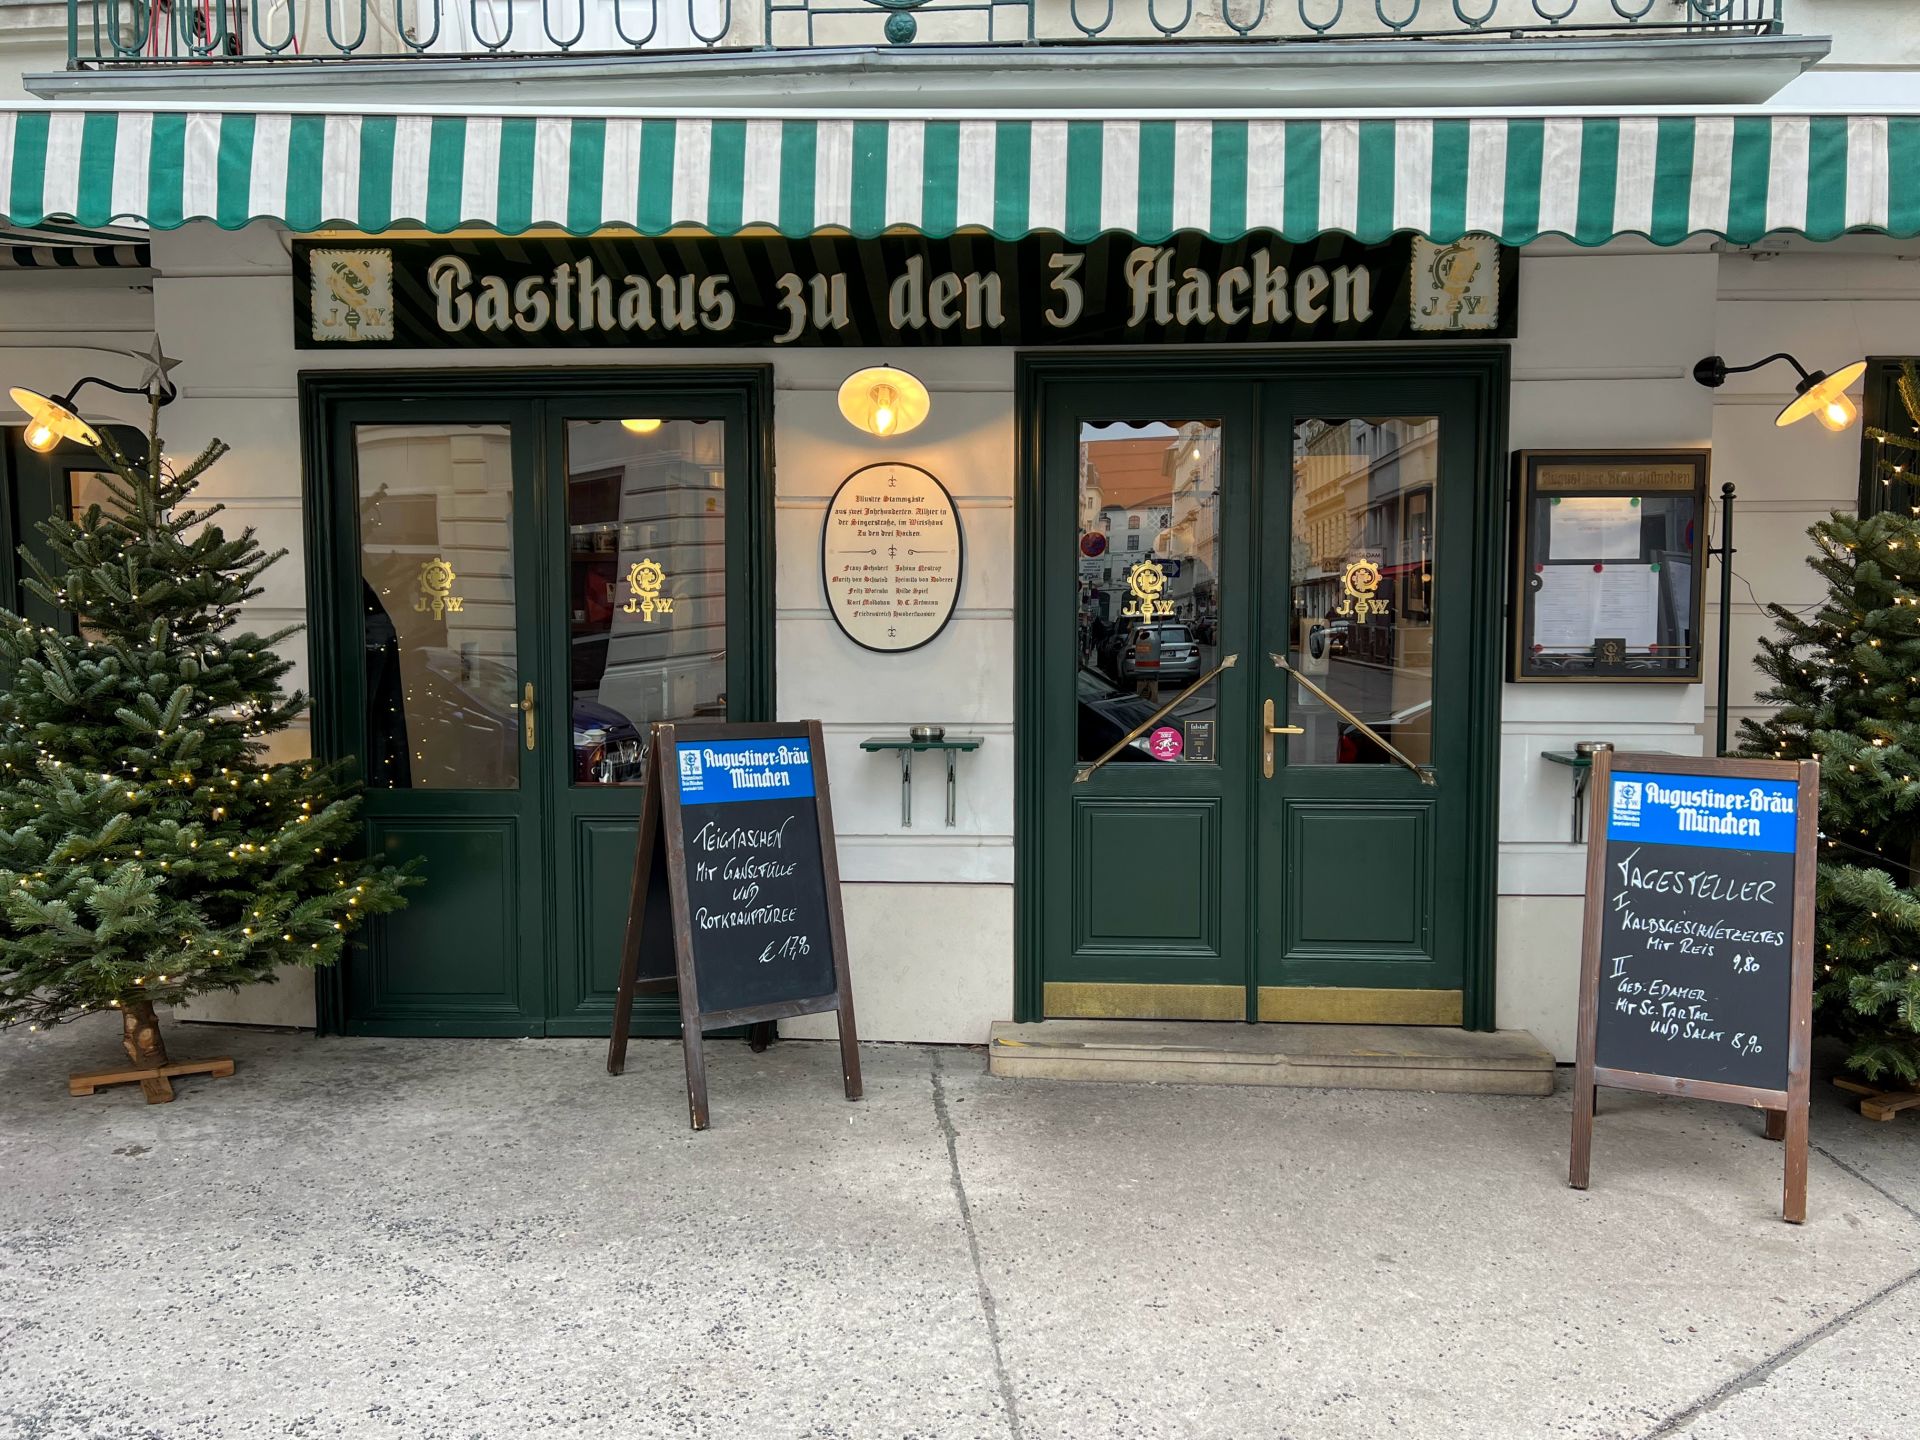 Zu den 3 Hacken- One of top 10 restaurants for lunches and dinners by district in Vienna 